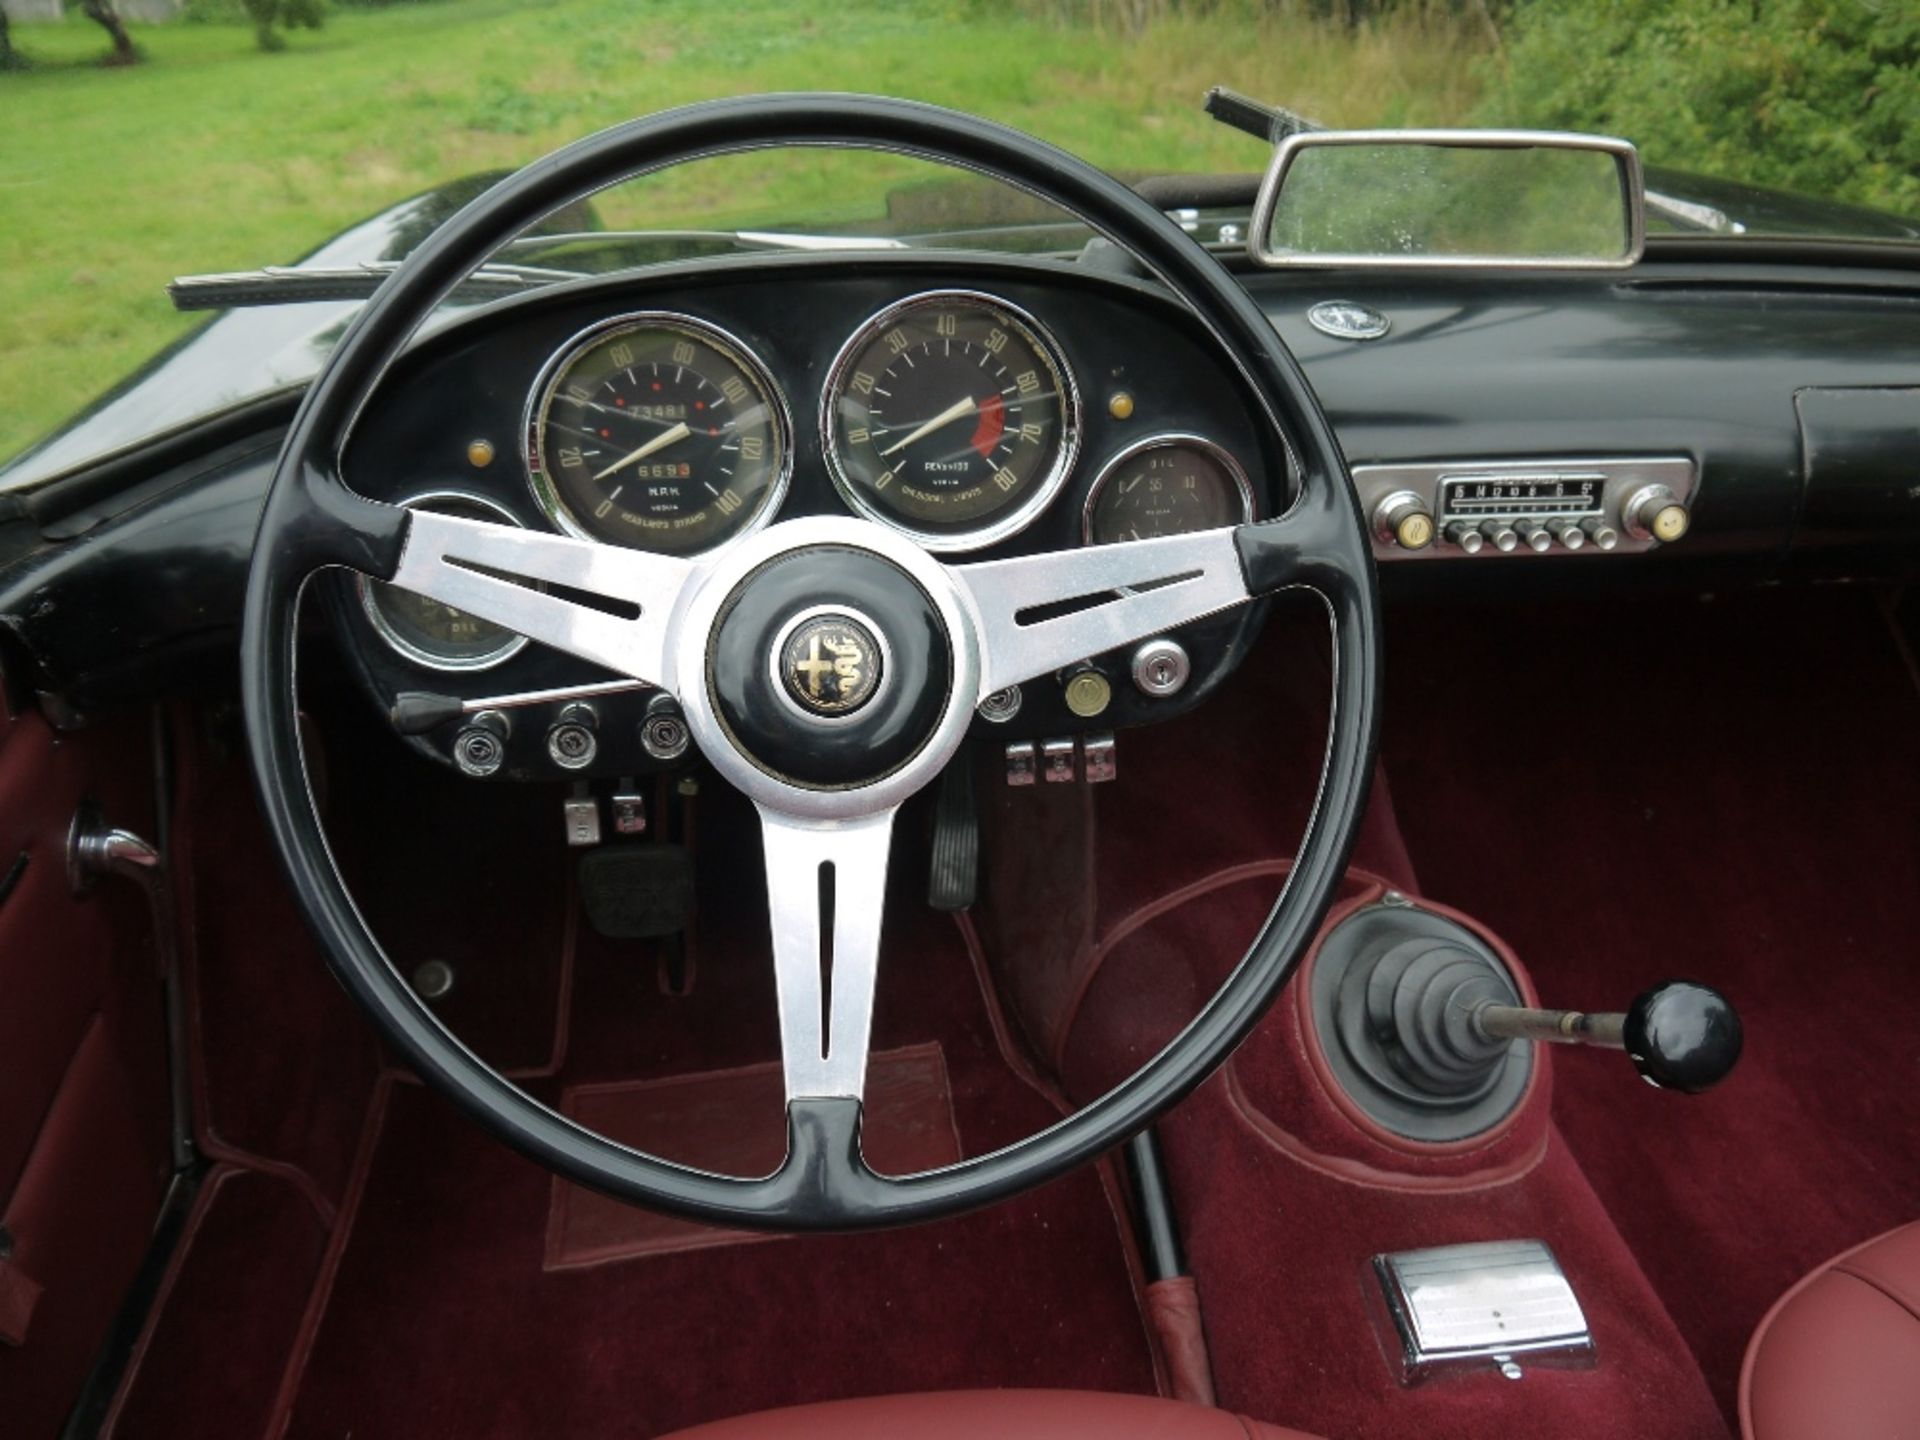 1960 ALFA ROMEO TOURING SPIDER Registration Number: 307 XVJ Chassis Number: AR*10204*000517 Recorded - Image 24 of 36